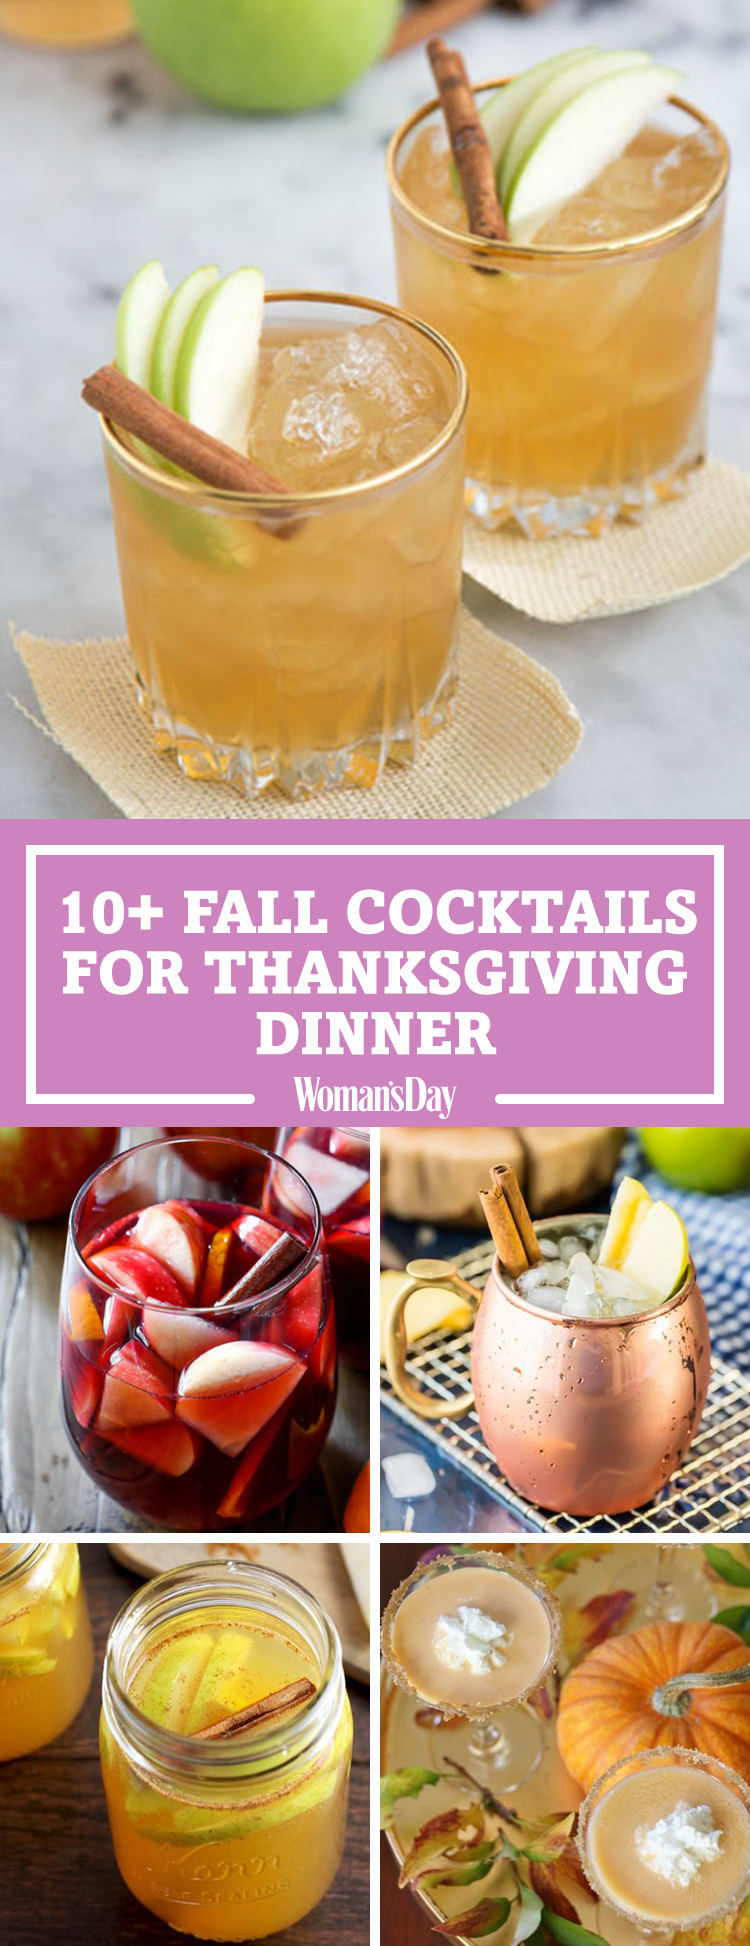 Thanksgiving Vodka Drinks
 14 Best Fall Cocktails for Thanksgiving Recipes for Easy